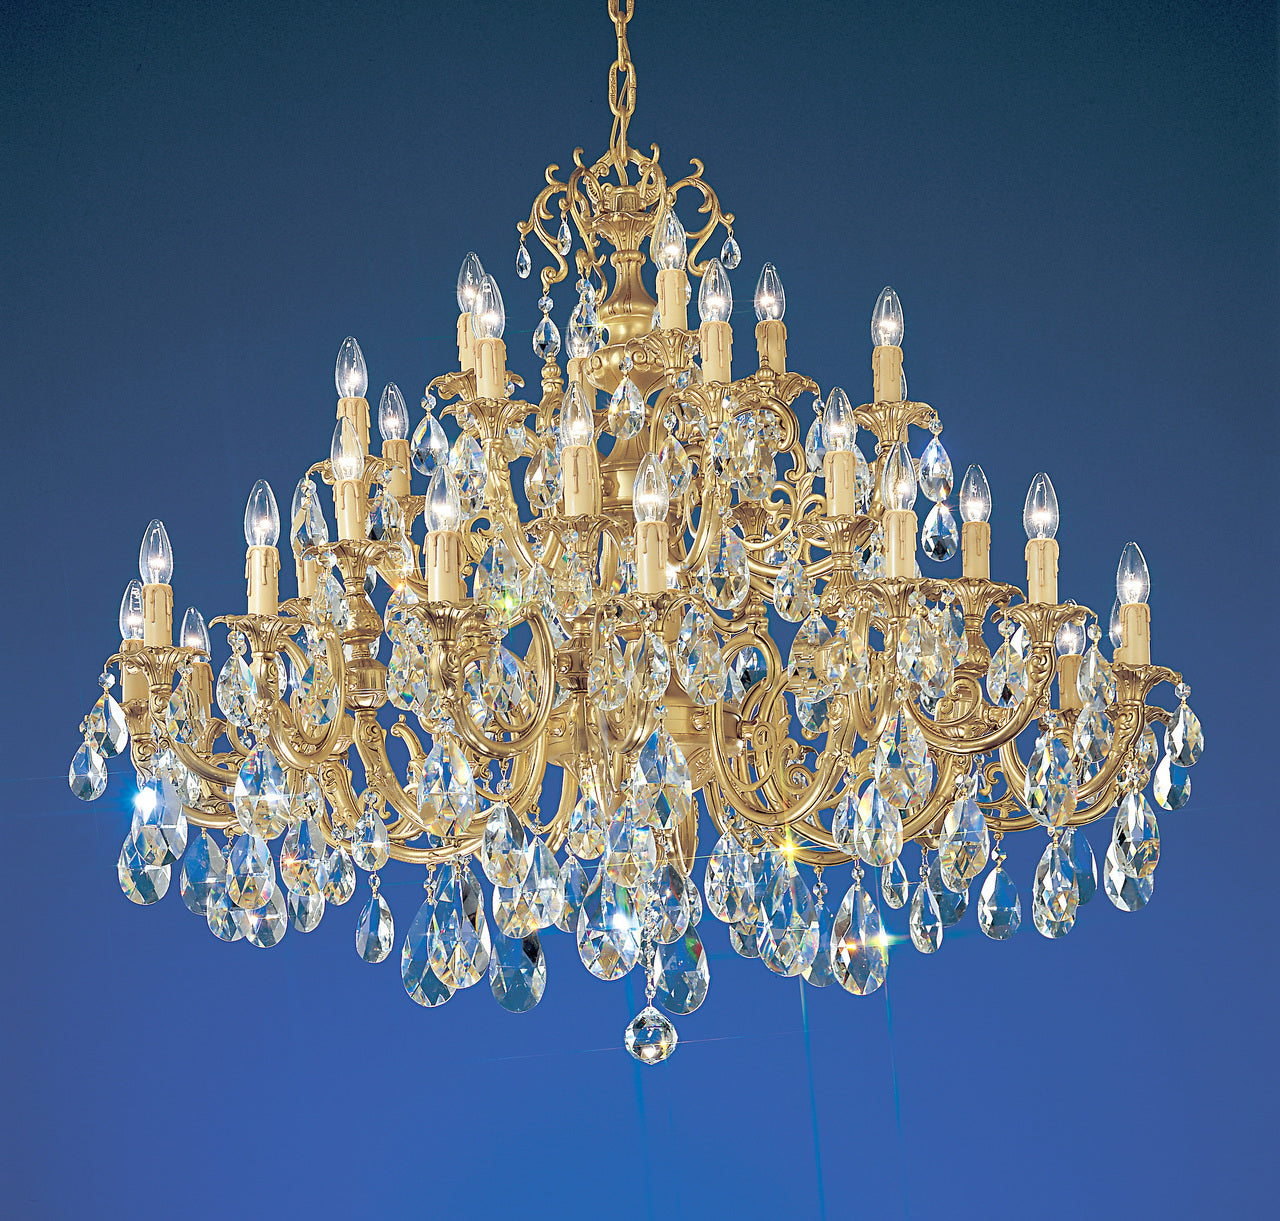 Classic Lighting 5736 SBB SC Princeton Crystal/Cast Brass Chandelier in Satin Bronze/Brown Patina (Imported from Spain)